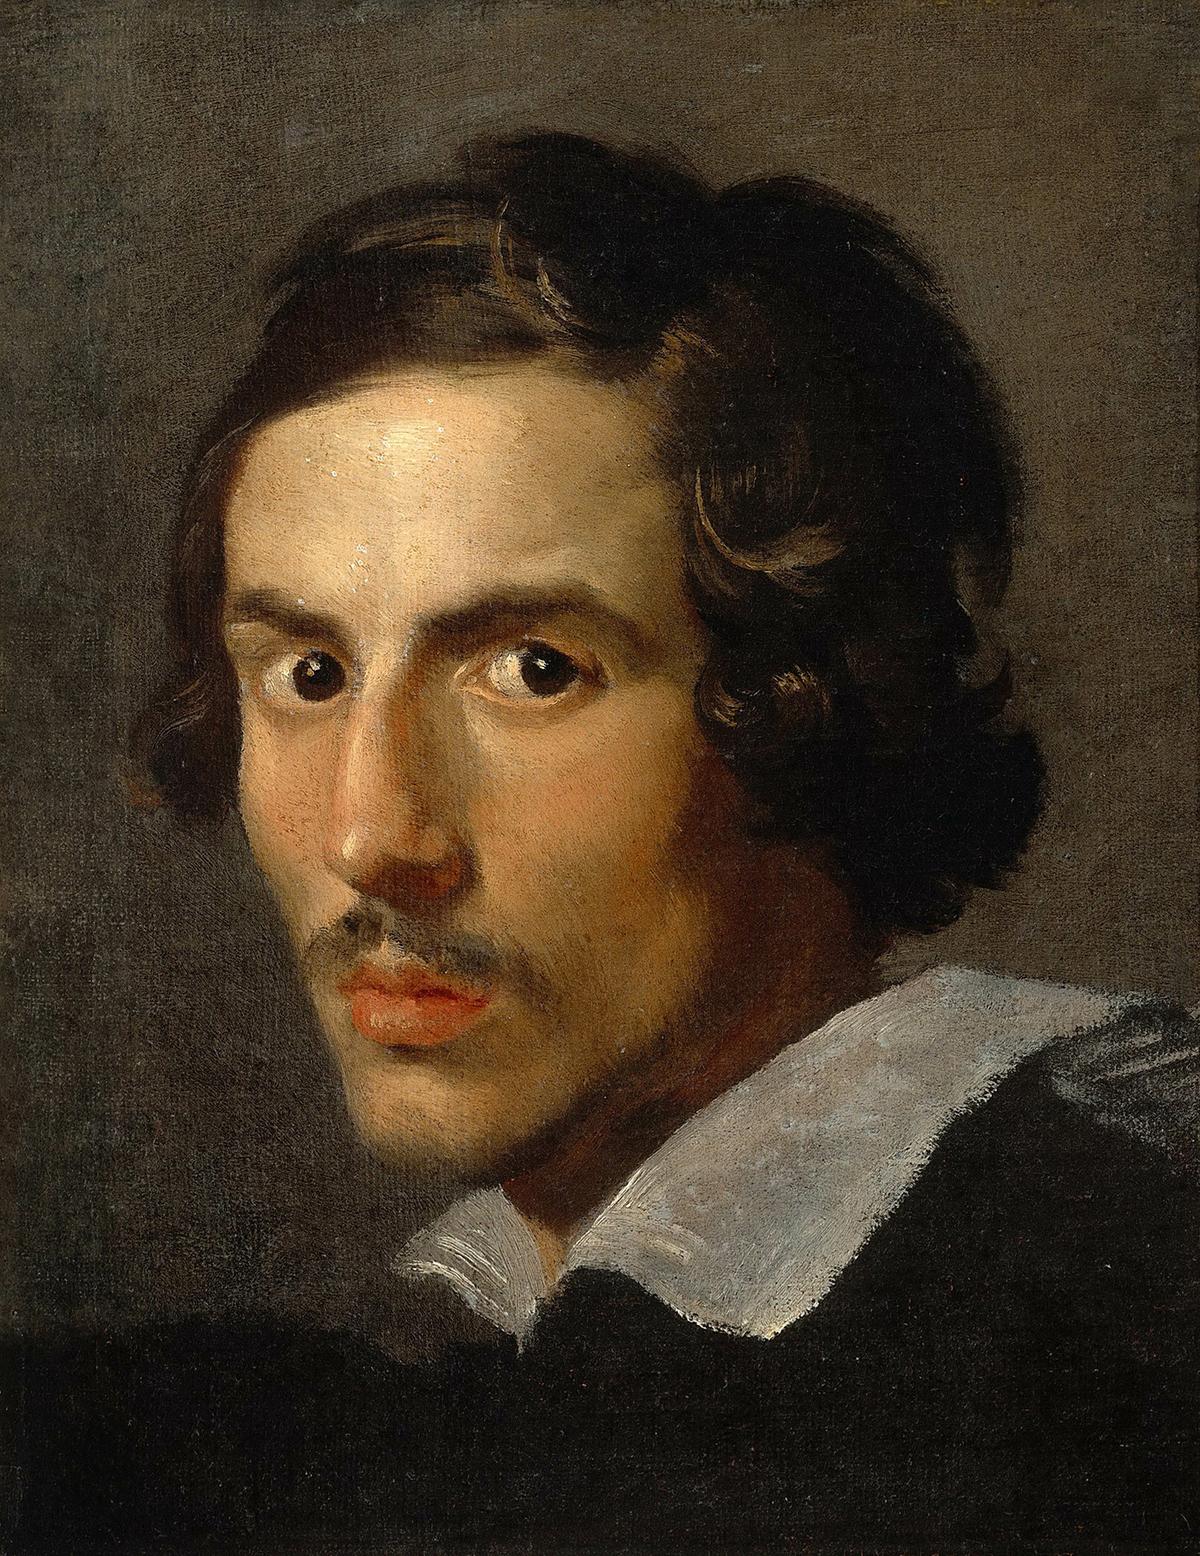 "Self-Portrait as a Young Man," 1623, by Gian Lorenzo Bernini. Oil on canvas; 14.9 inches by 11.8 inches. Borghese Gallery, Italy. (Public Domain)